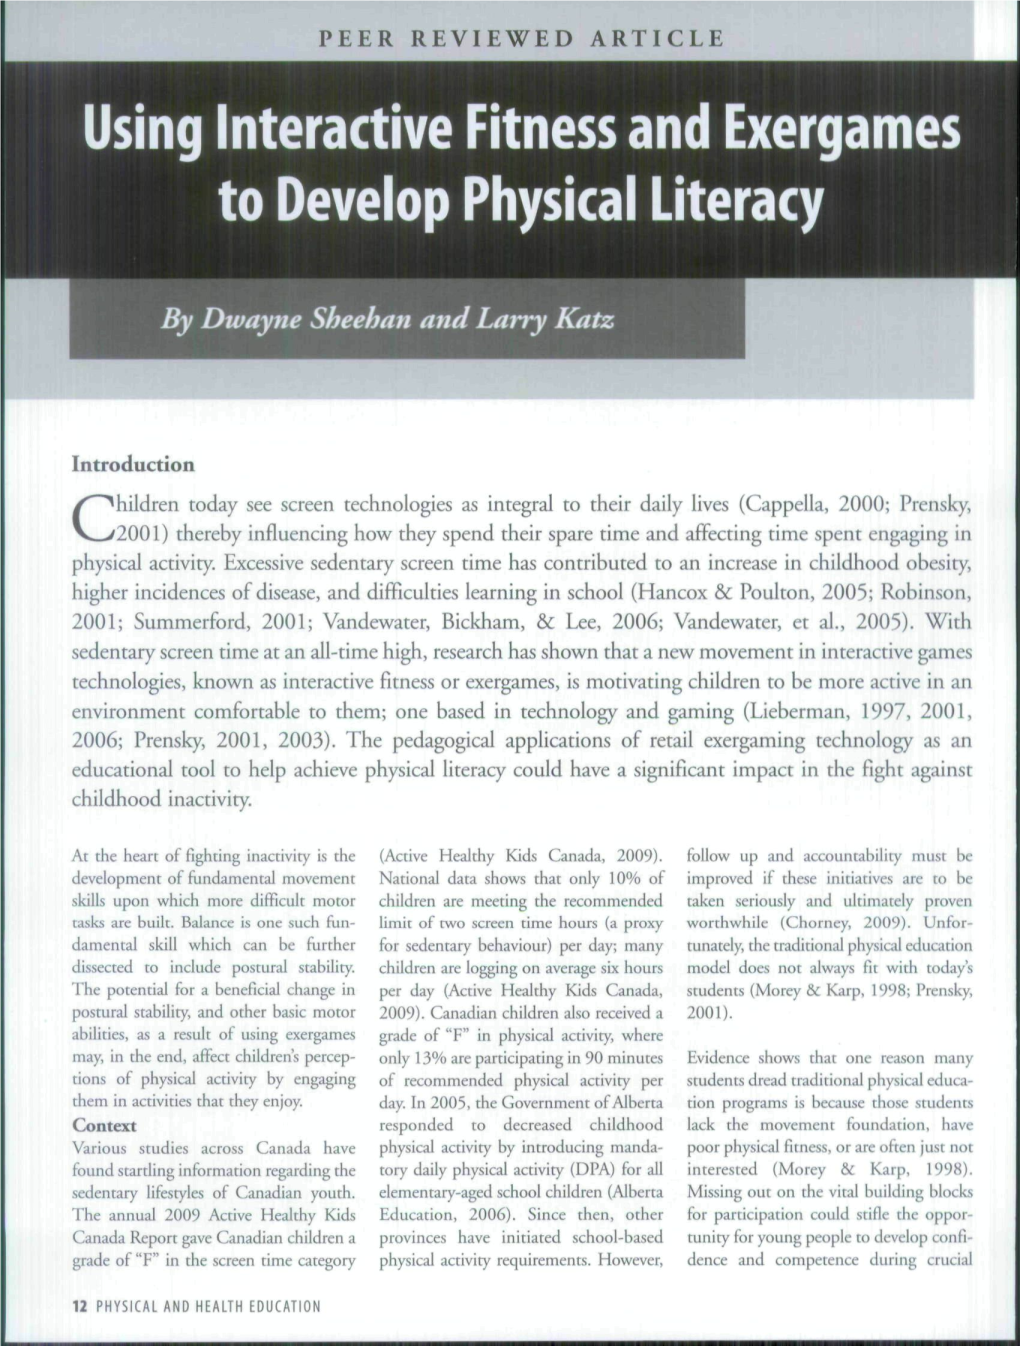 Using Interactive Fitness and Exergames to Develop Physical Literacy